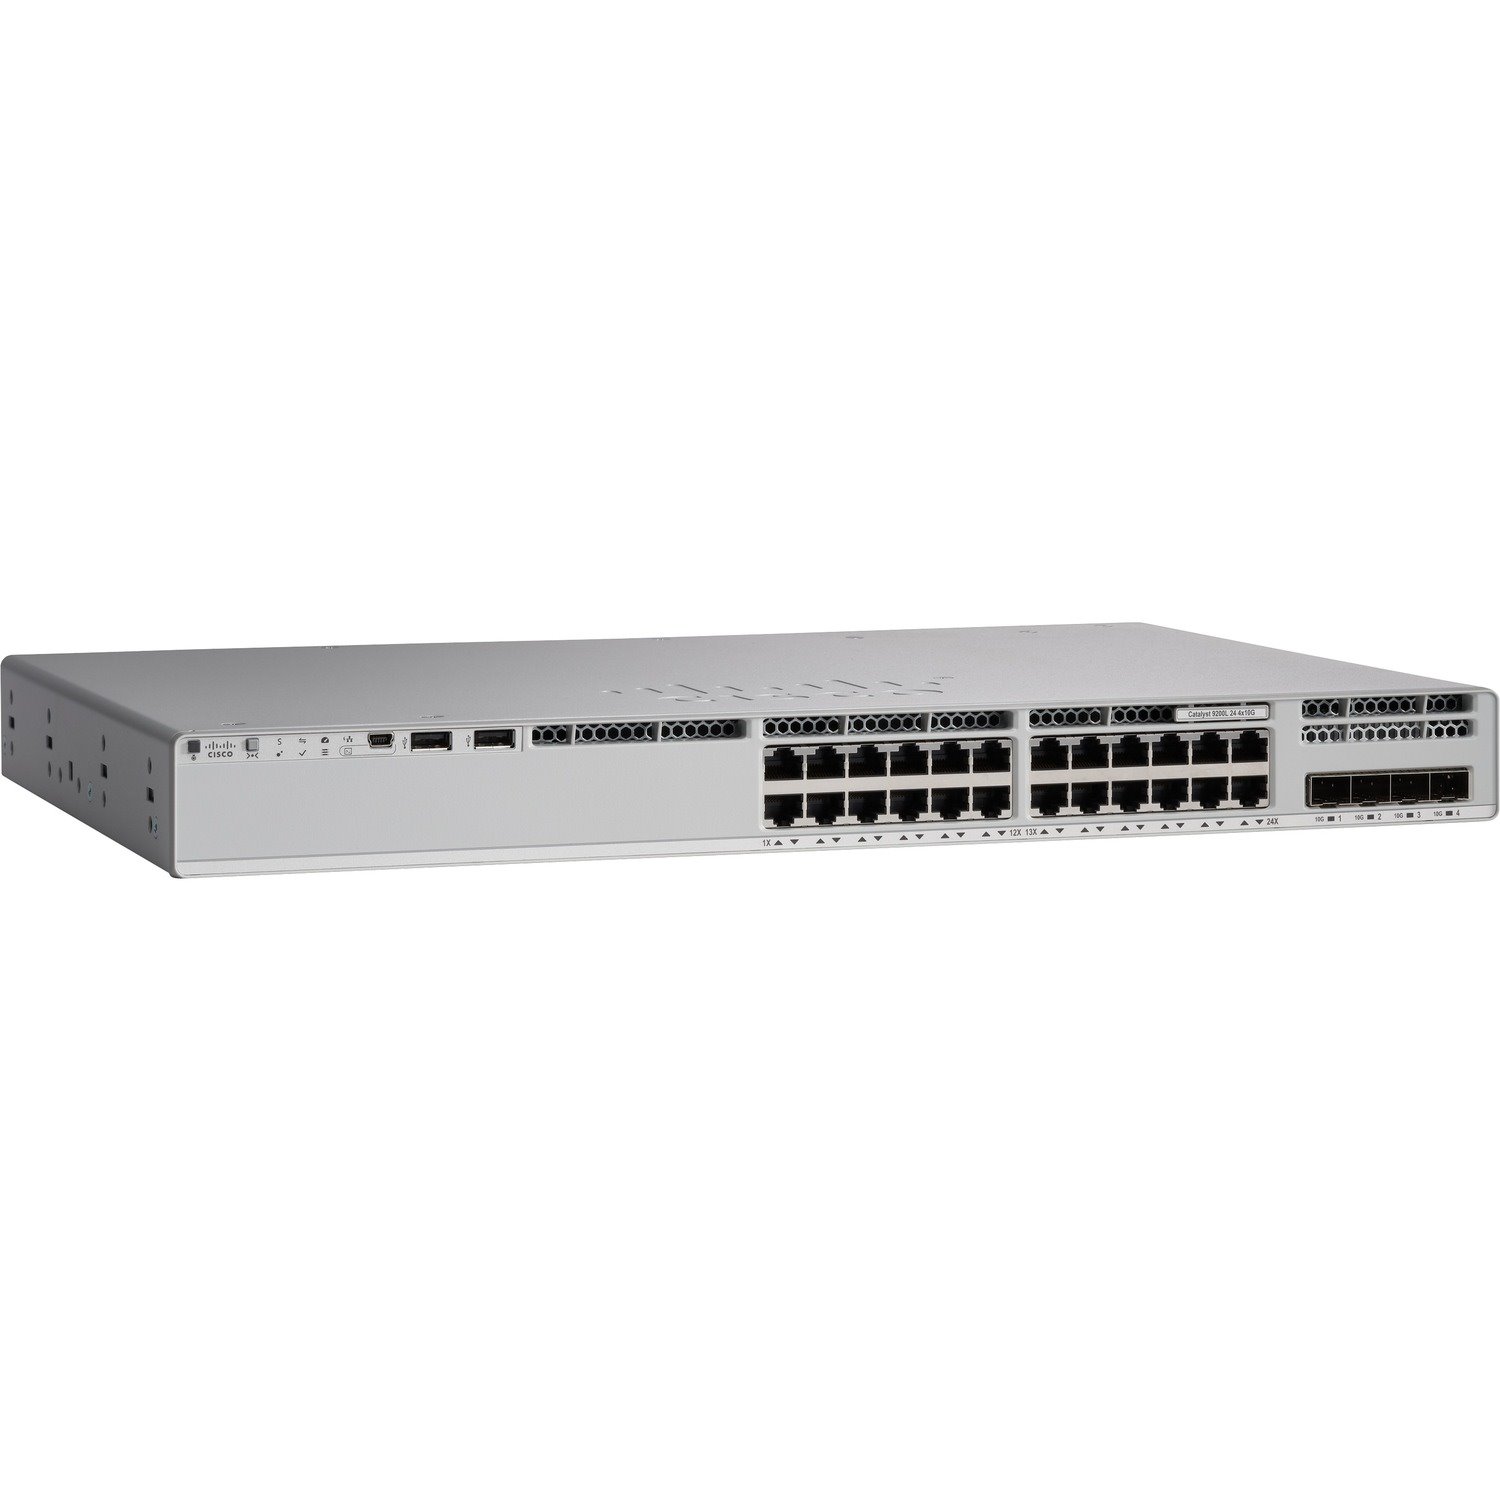 Cisco Catalyst 9200 C9200L-24T-4X 24 Ports Manageable Ethernet Switch - Refurbished